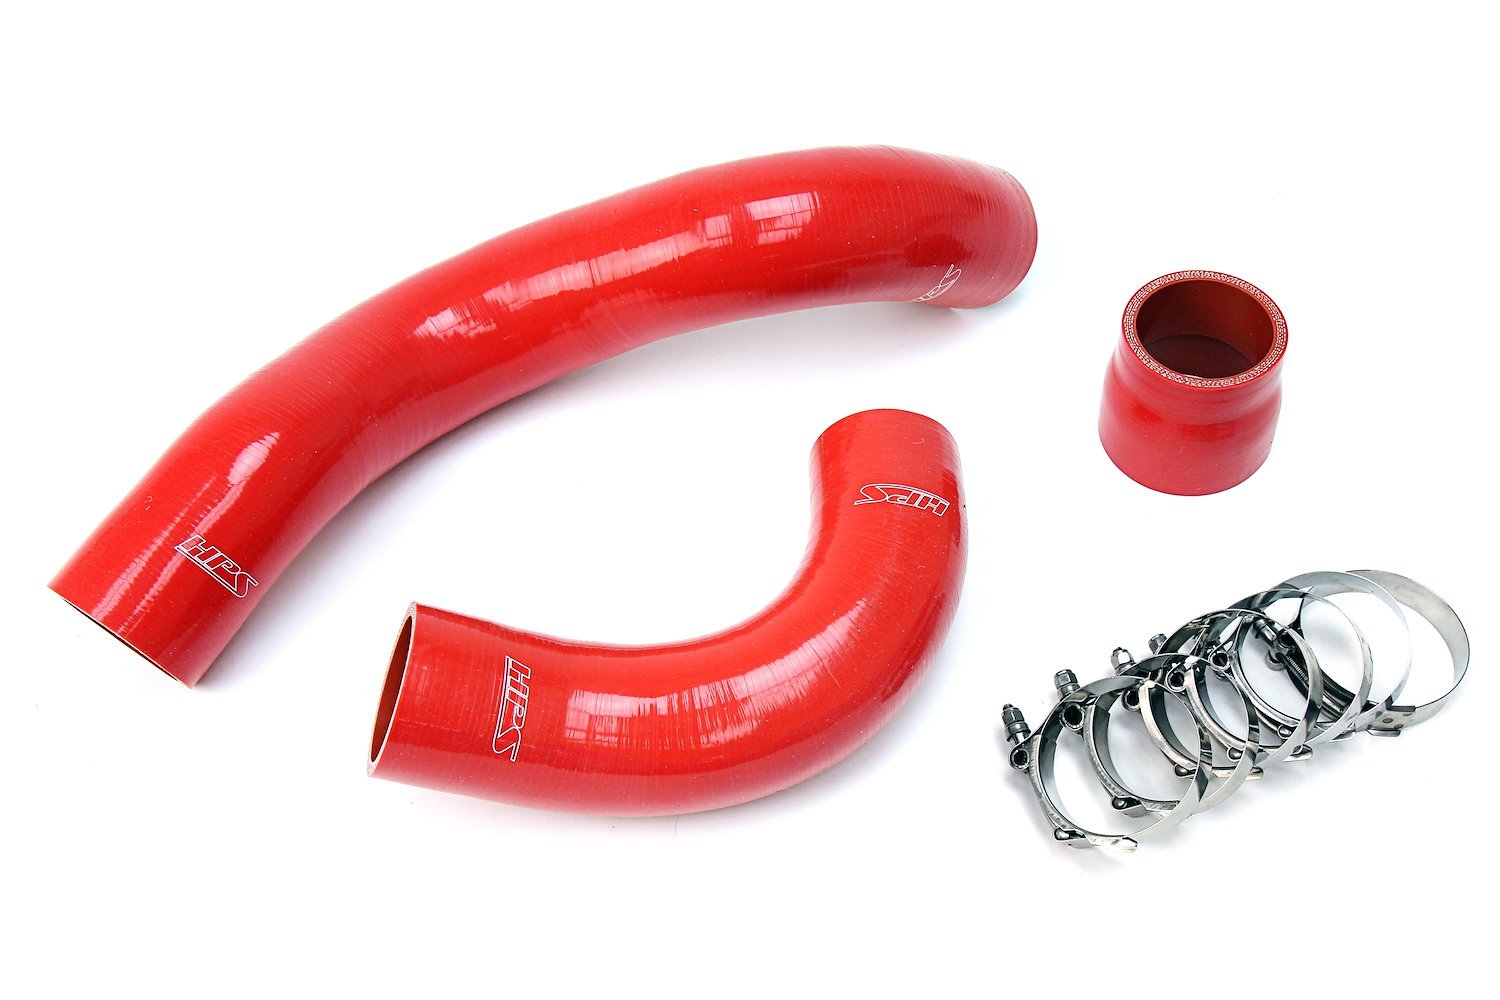 57-1697-RED Silicone Intercooler Hose Kit, High-Temp Resistant 4-Ply Reinforced Silicone, Replaces Rubber Intercooler Hoses